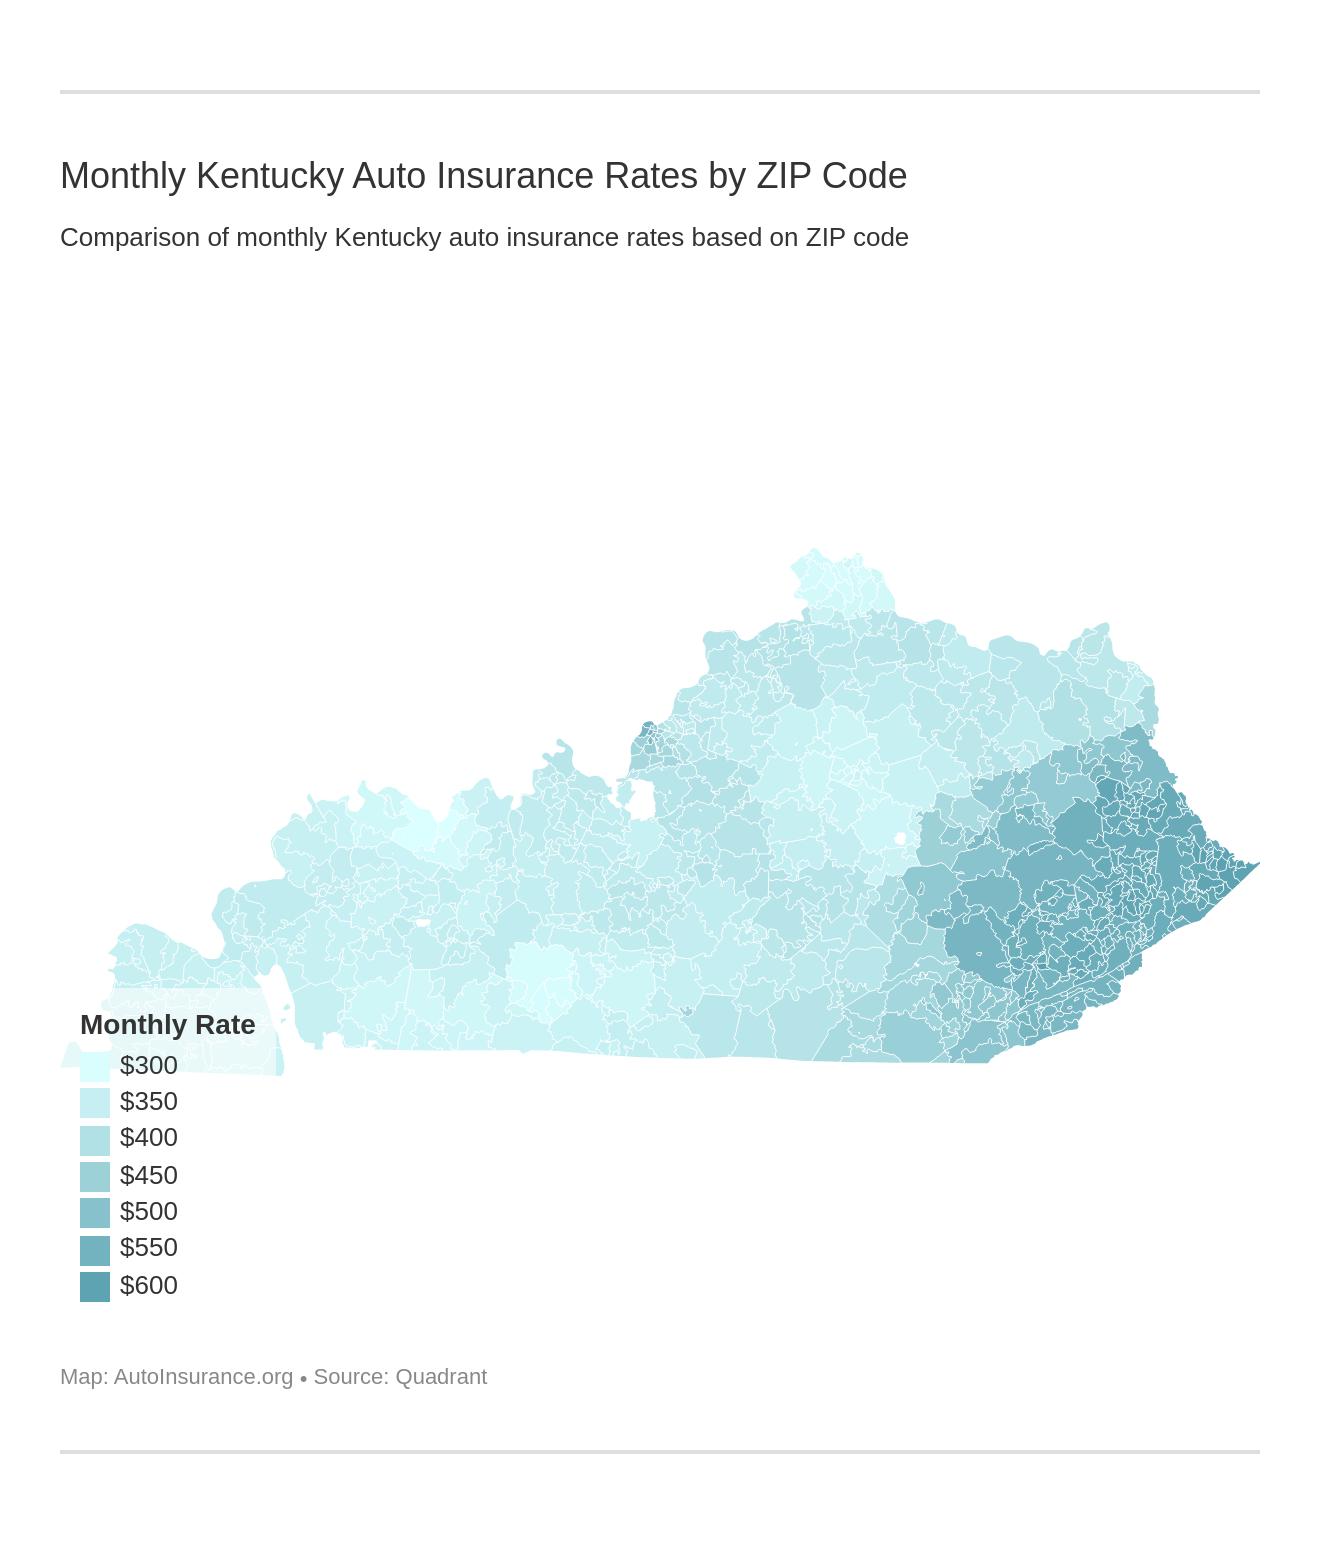 Monthly Kentucky Auto Insurance Rates by ZIP Code